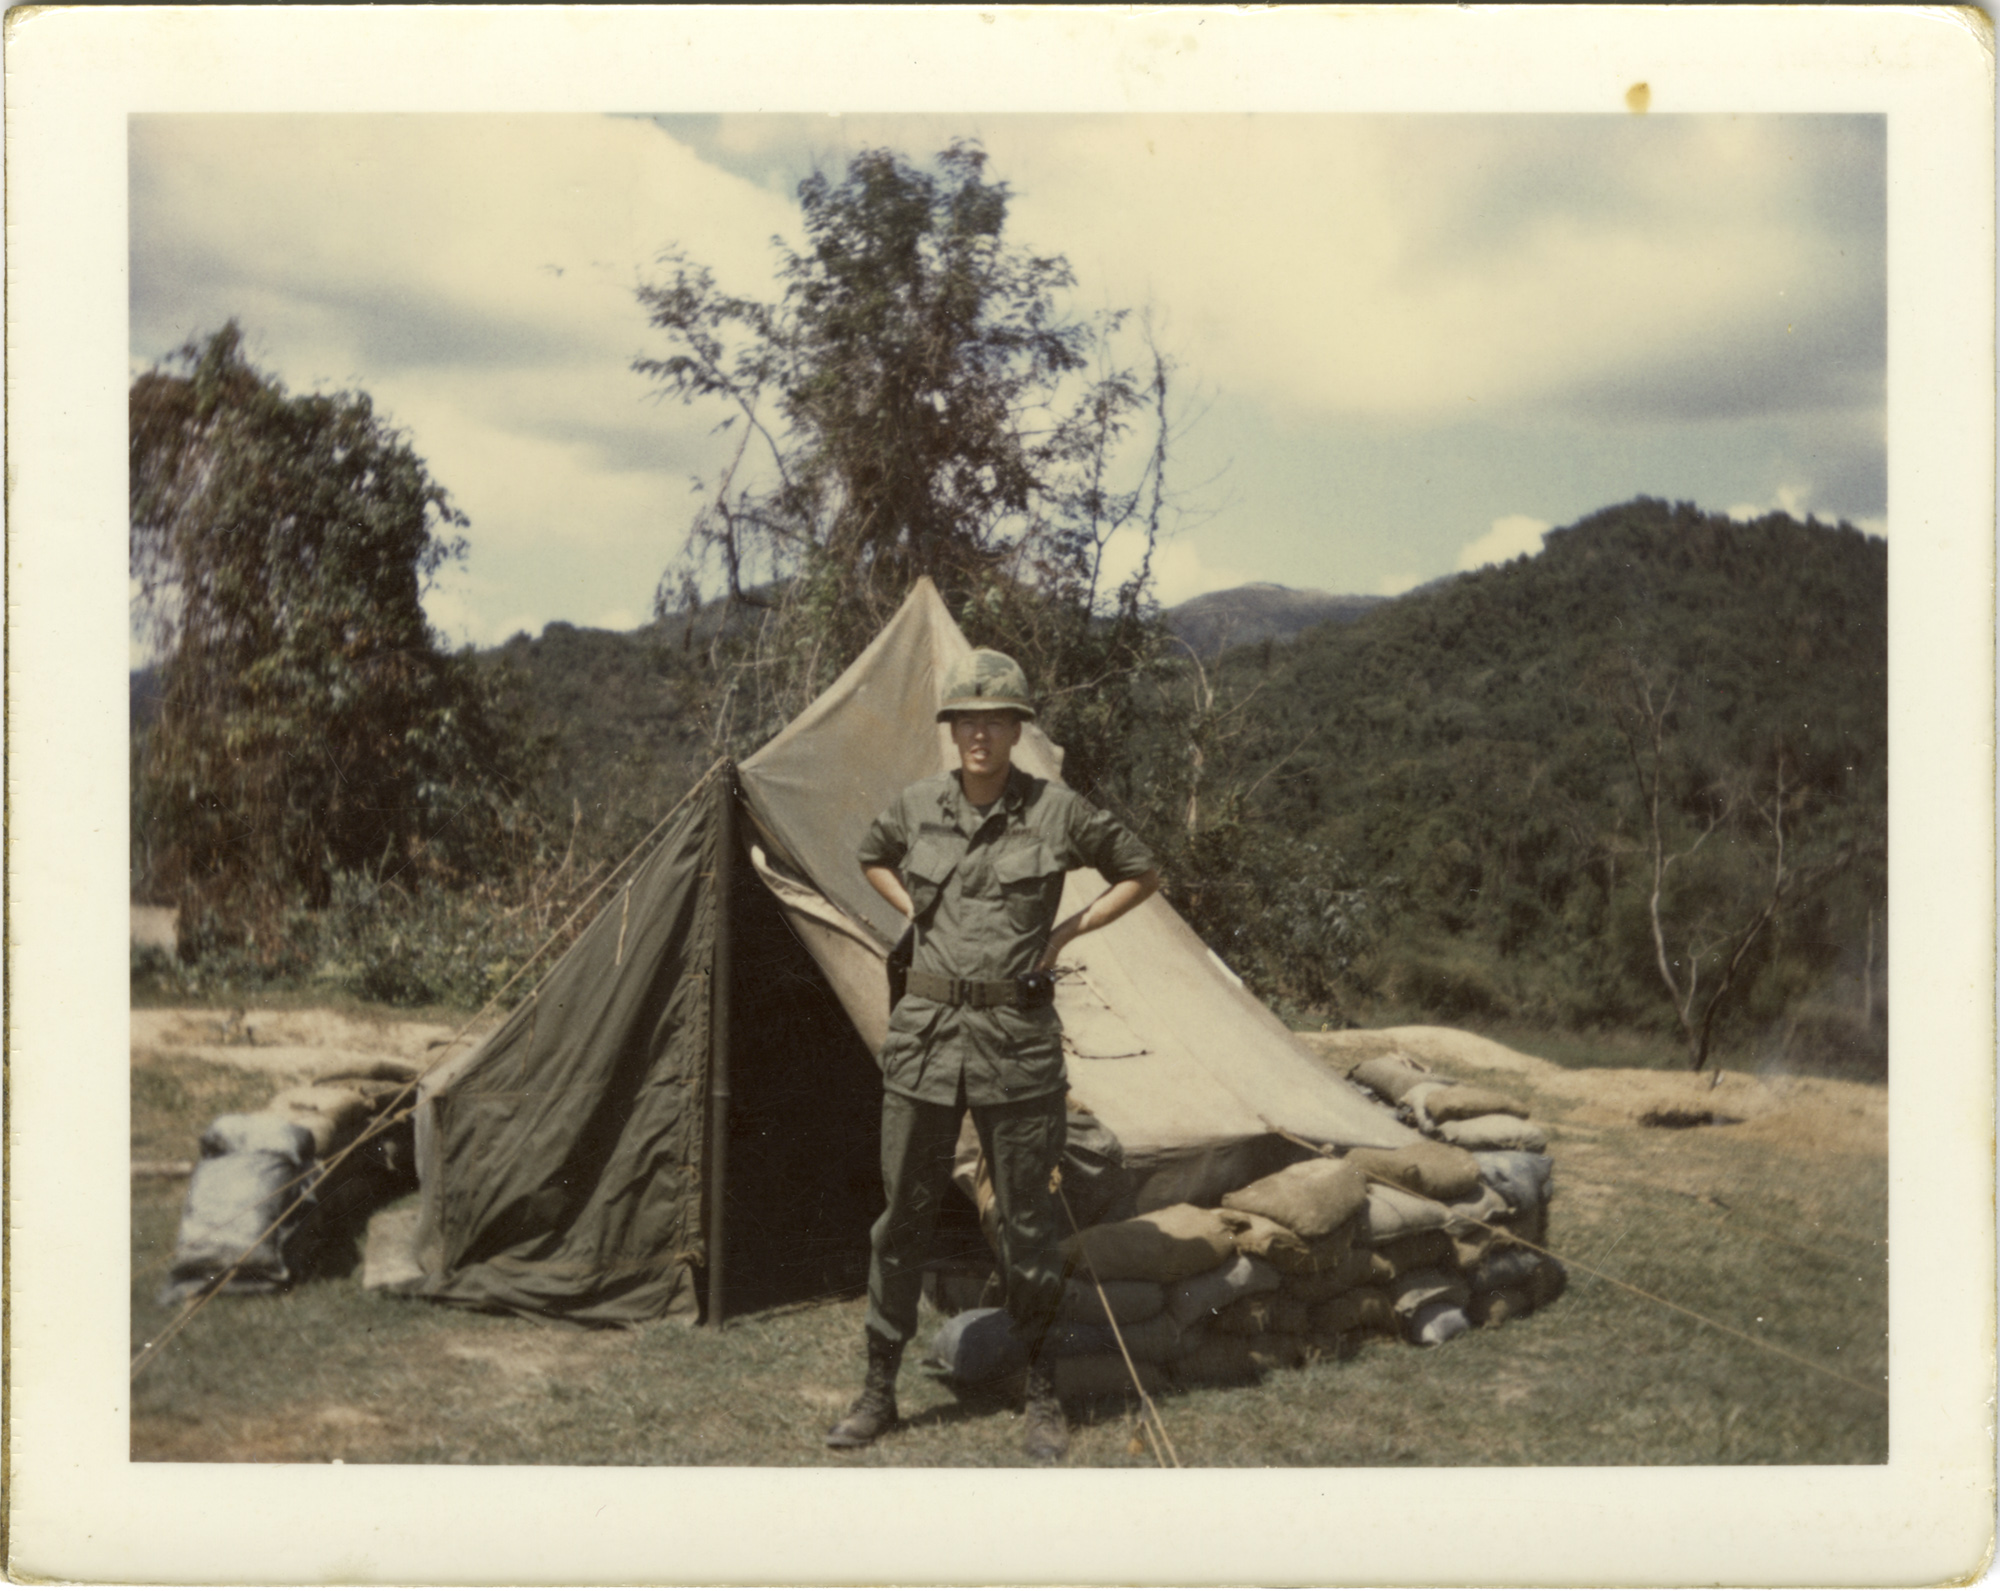 A soldier stands in front of tent in a mountainous landscape.